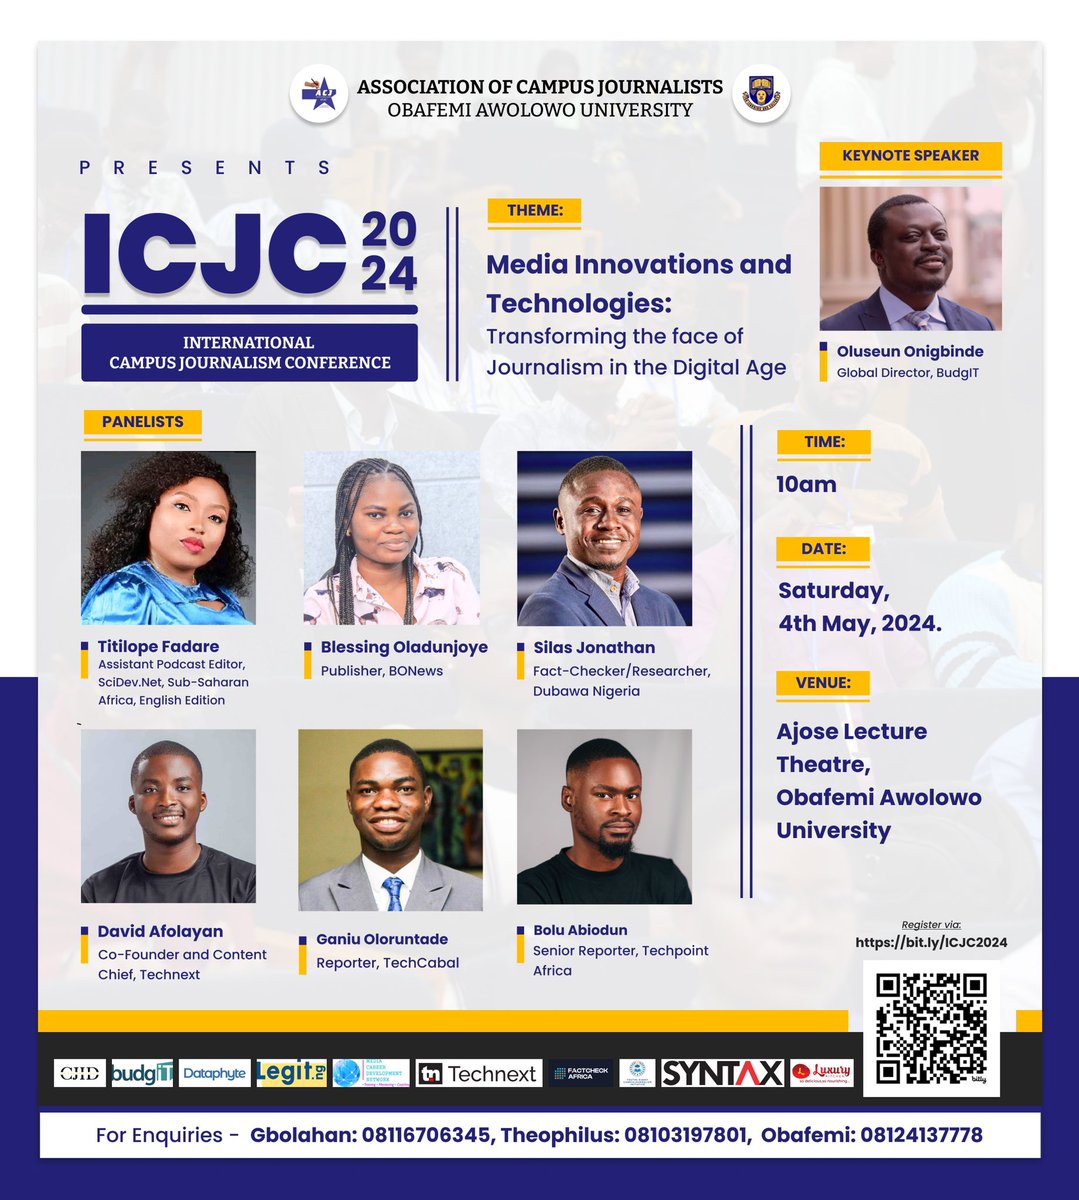 2024 INTERNATIONAL CAMPUS JOURNALISM CONFERENCE Unveiling our Keynote Speaker @seunonigbinde and Panelists ICJC24 is here This is a conference that has been put together for everyone to learn from the experts Registration Link bit.ly/ICJC2024 Register and be there!